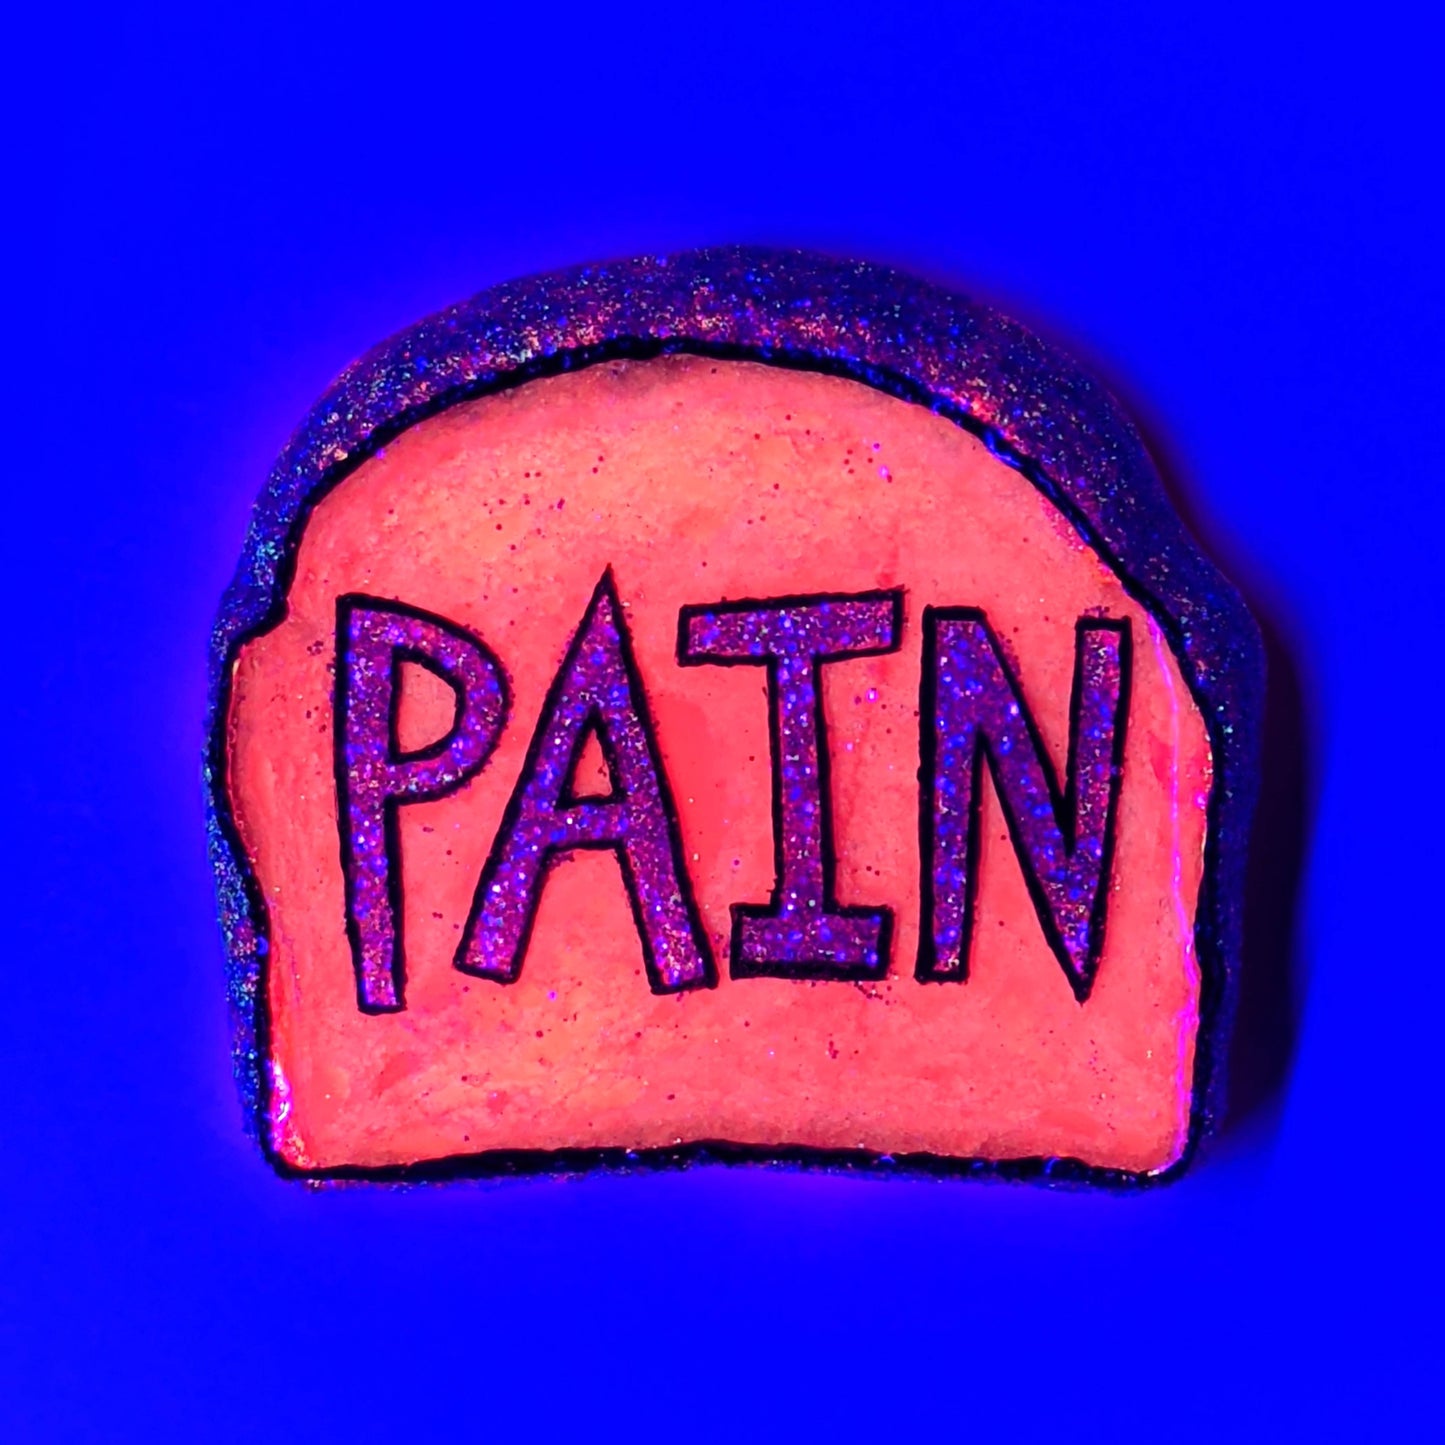 Daily Bread #022 "Bread is Pain"